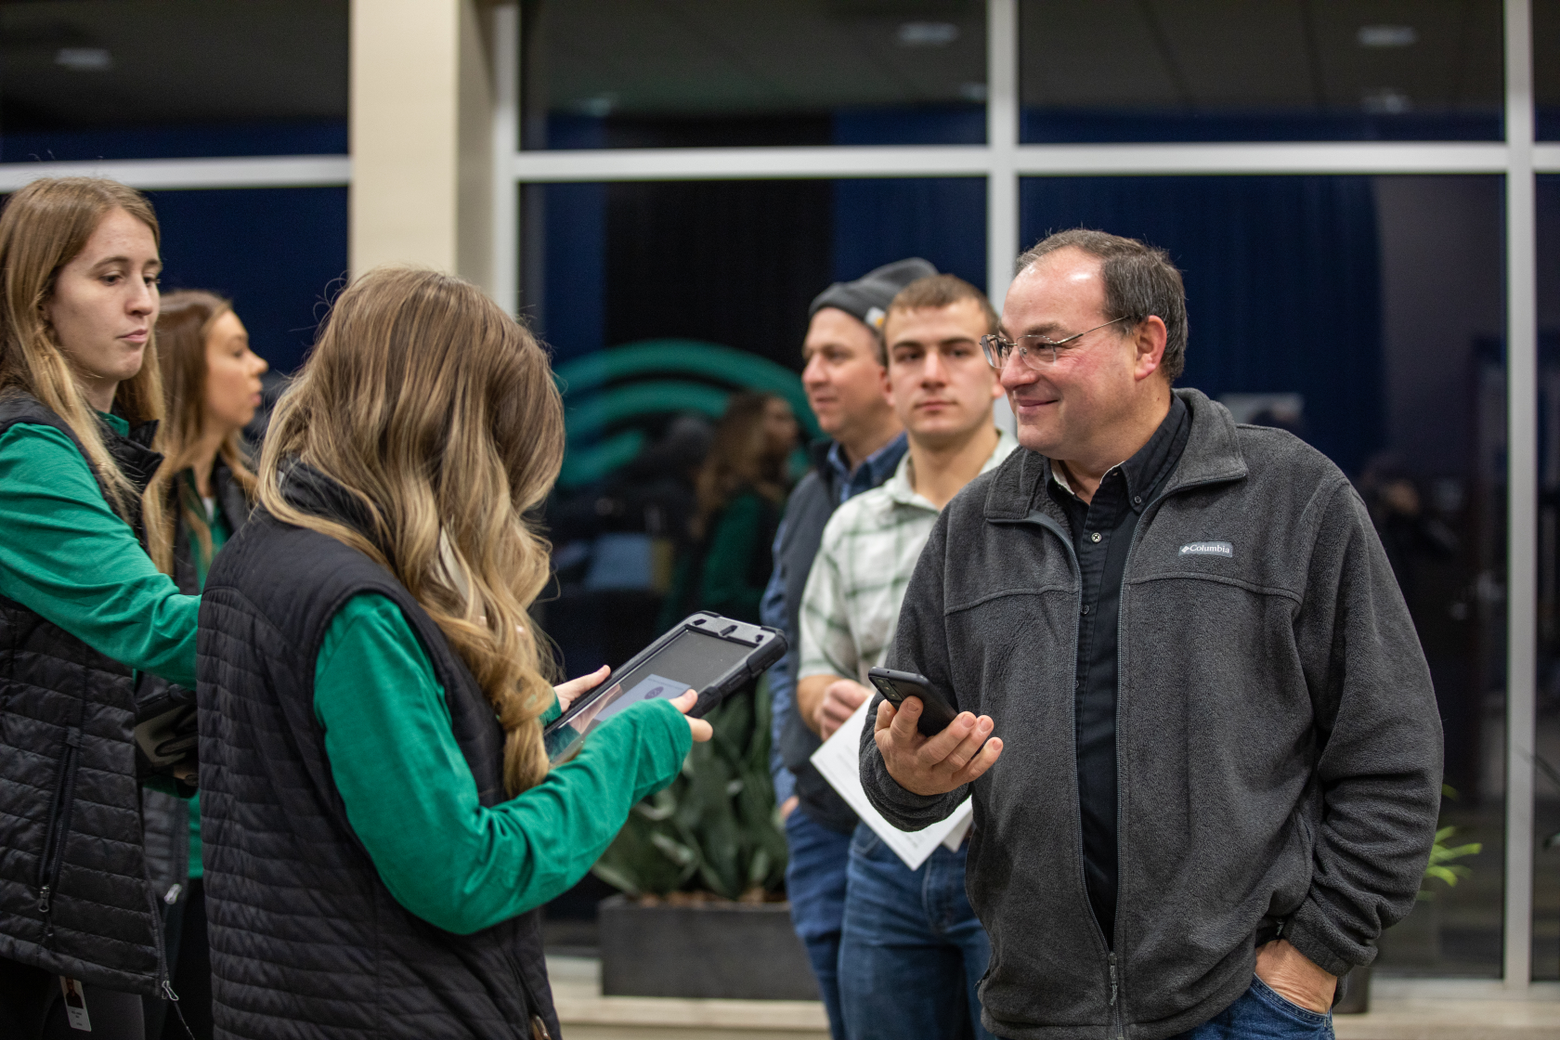 Event check in for Winter Conference 2023 at Precision Planting